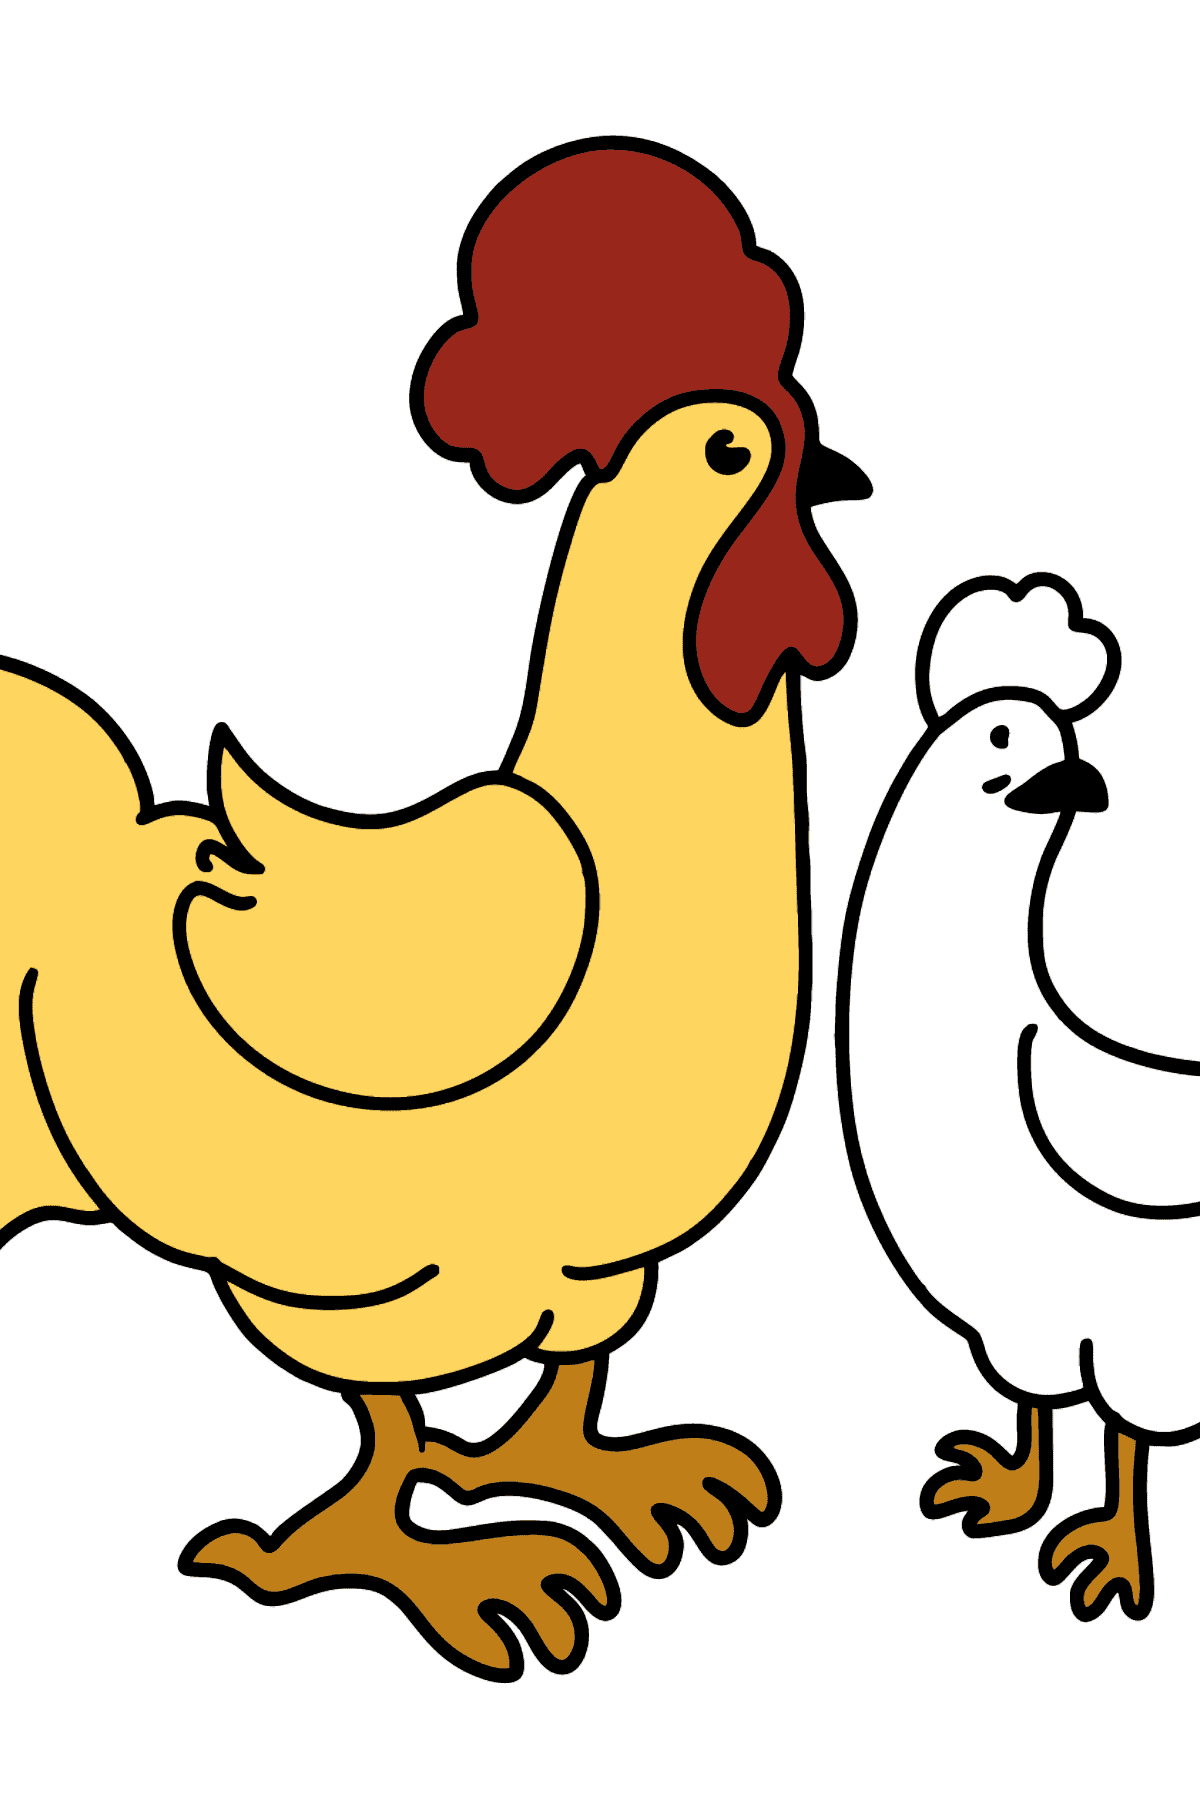 Rooster and Hen coloring page - Coloring Pages for Kids